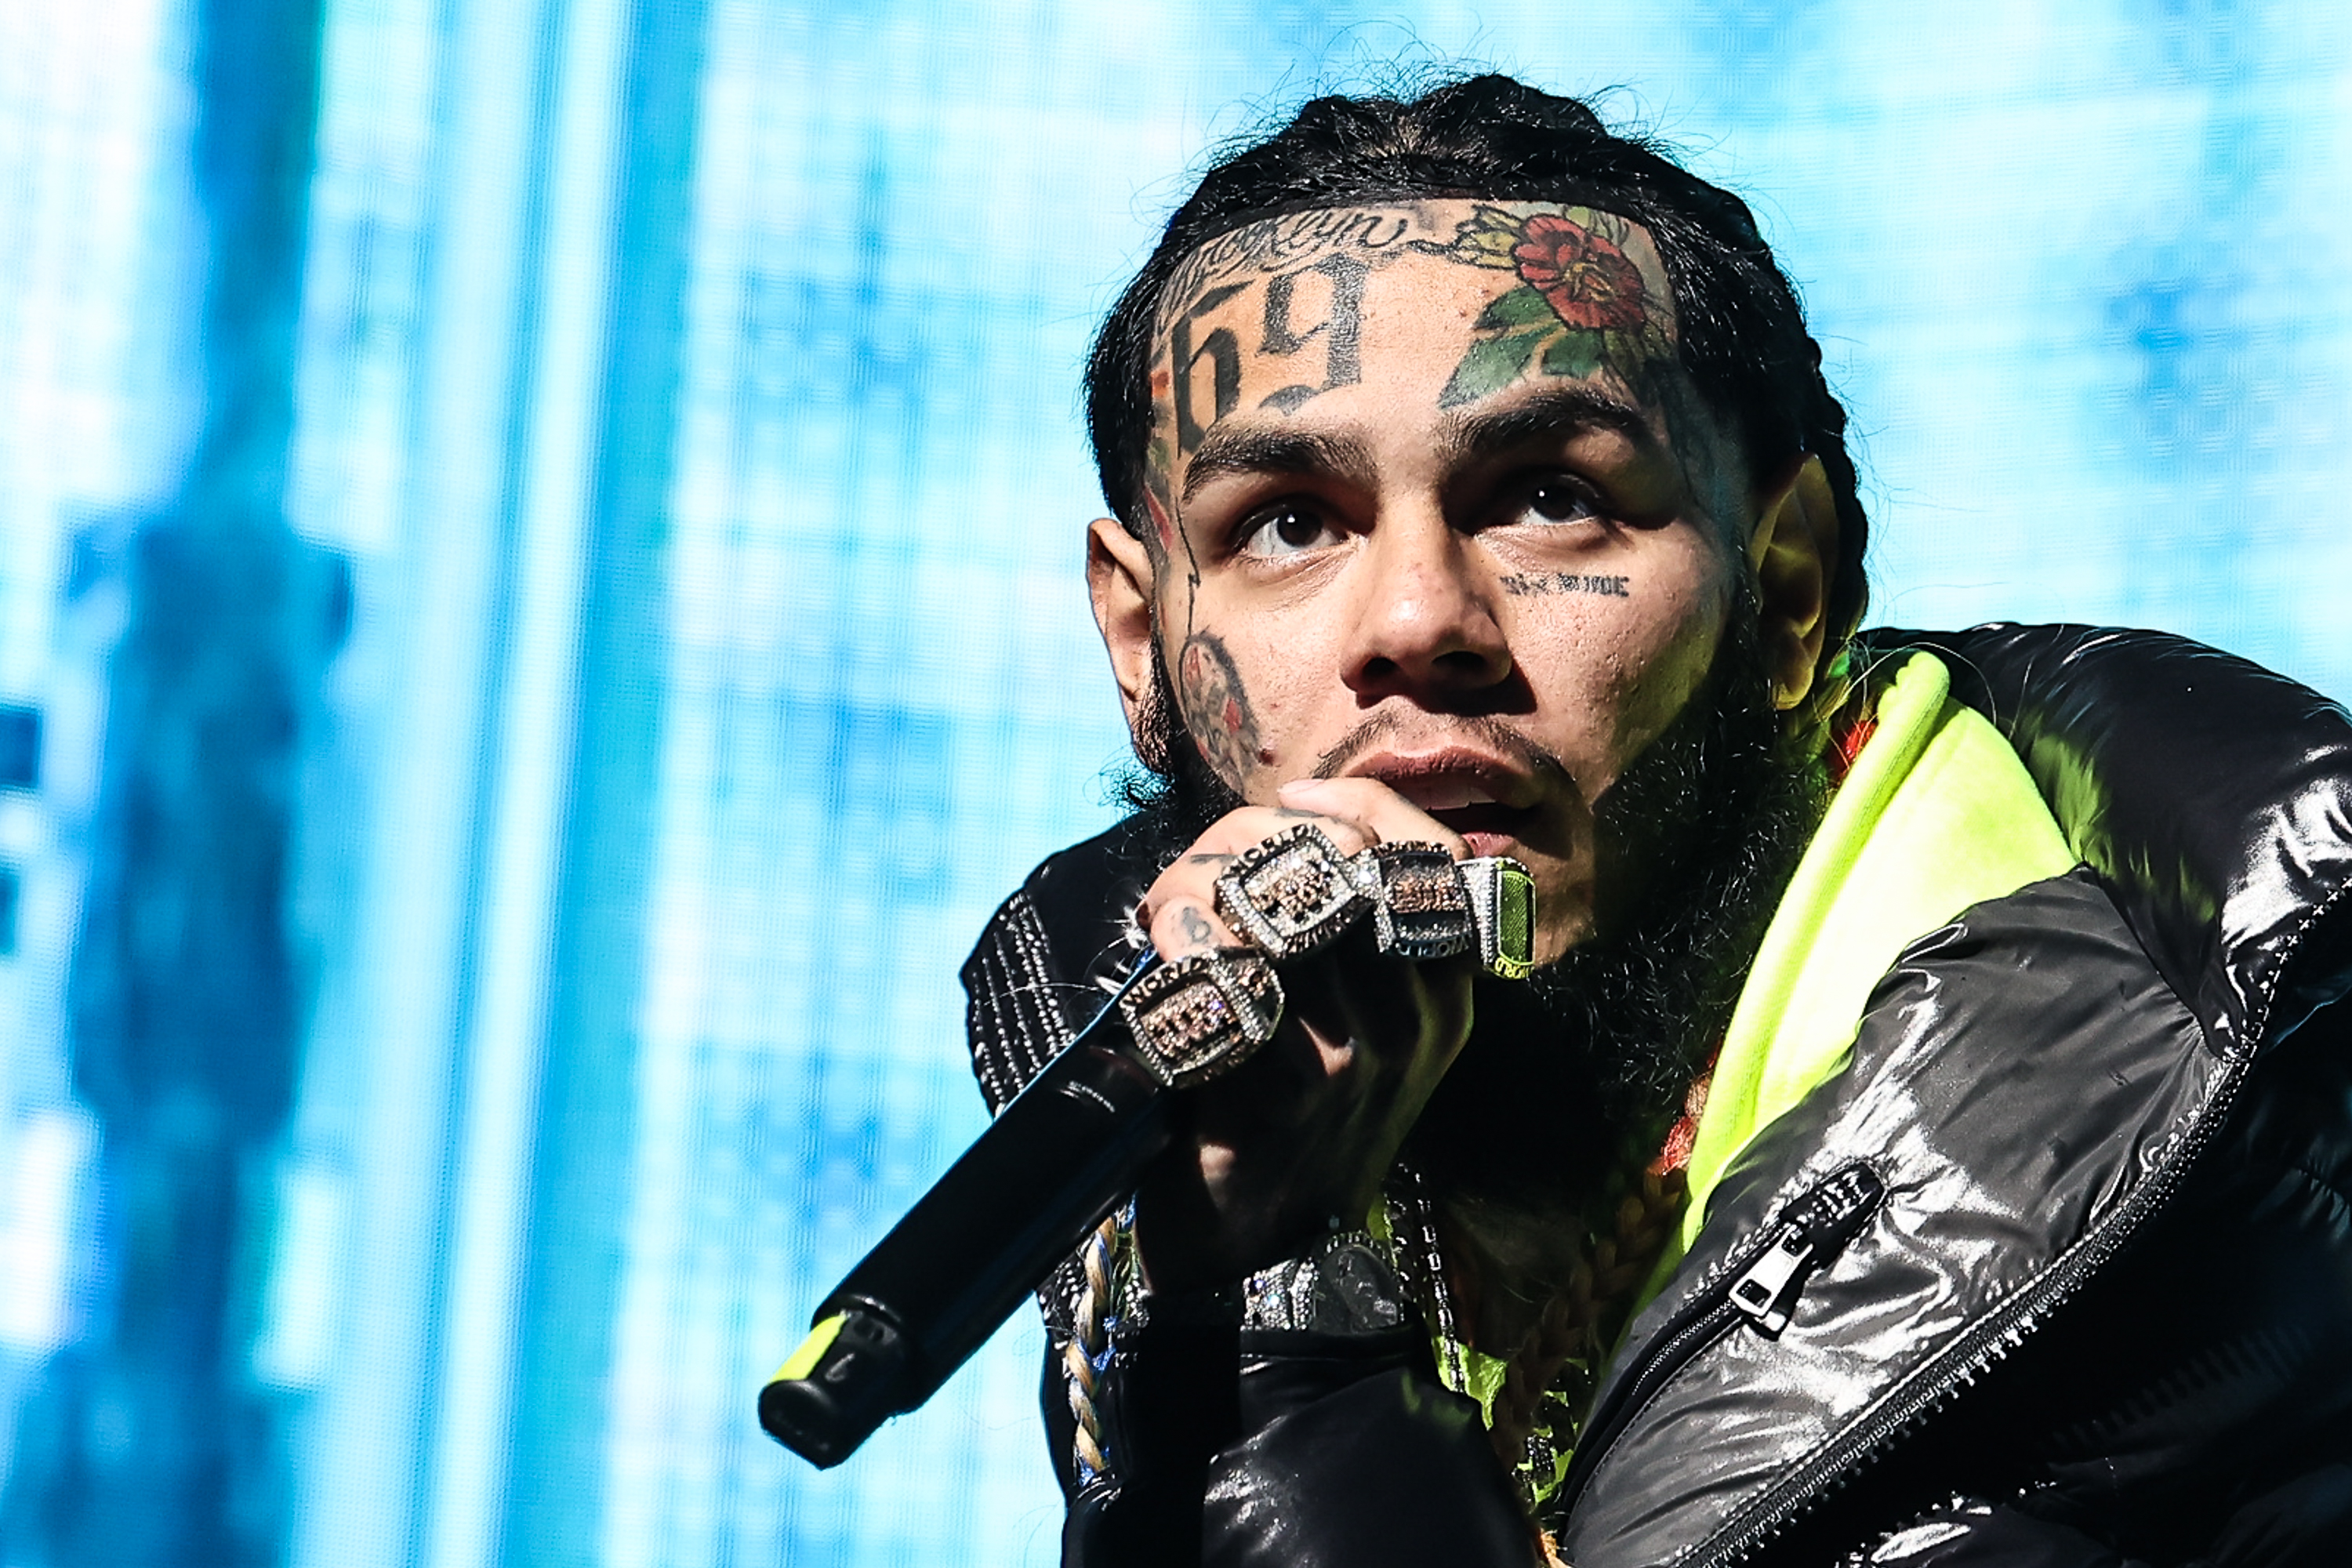 6ix9ine Displays His Singing Chops In New Snippet